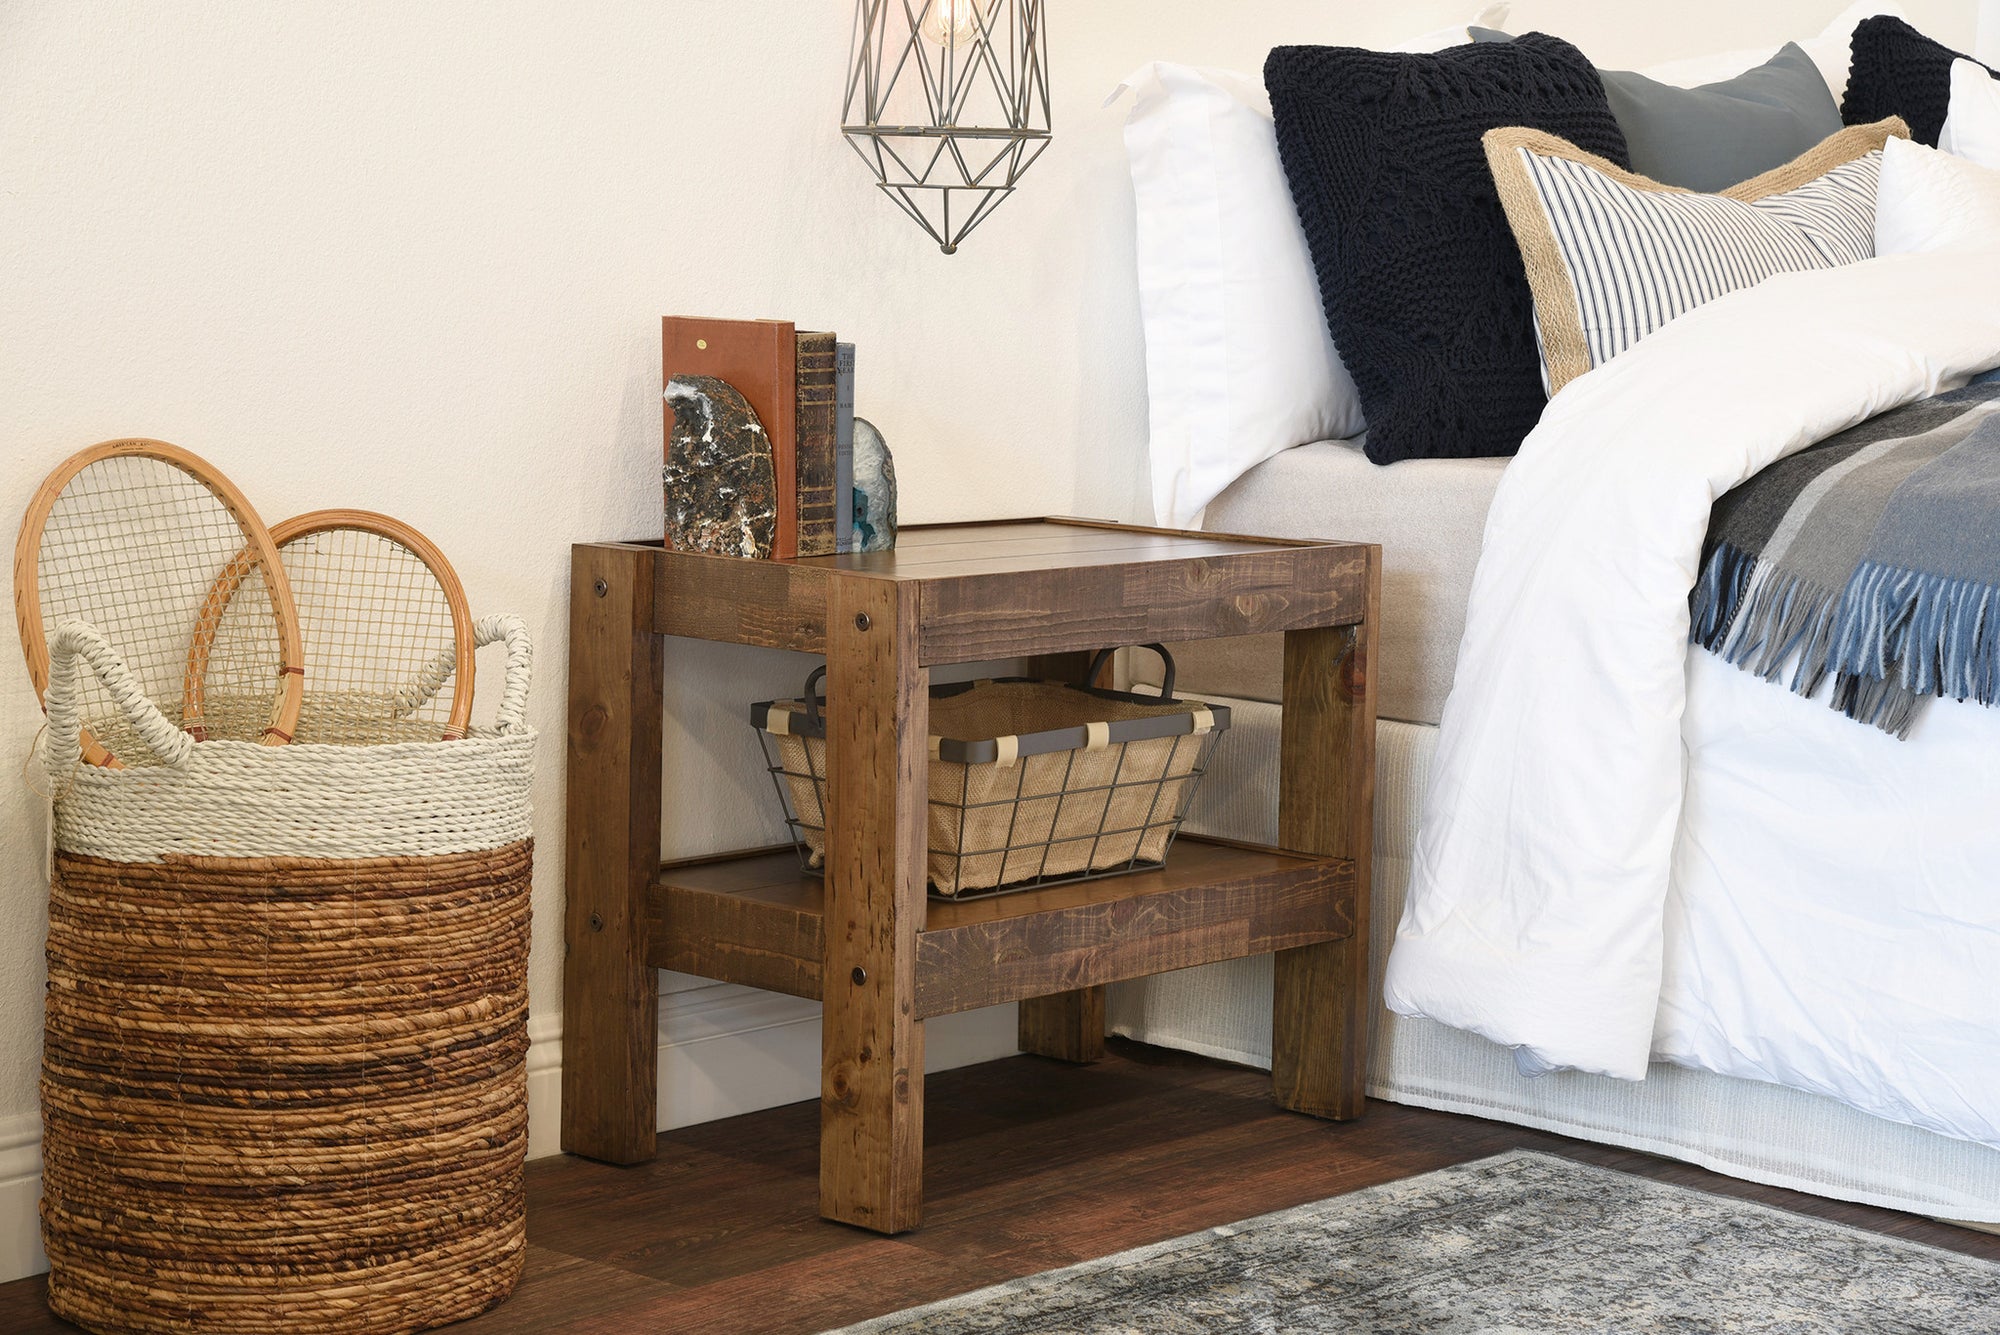 Reclaimed Rustic Farmhouse Pallet Wood Style End Table / Nightstand - presEARTH Spice